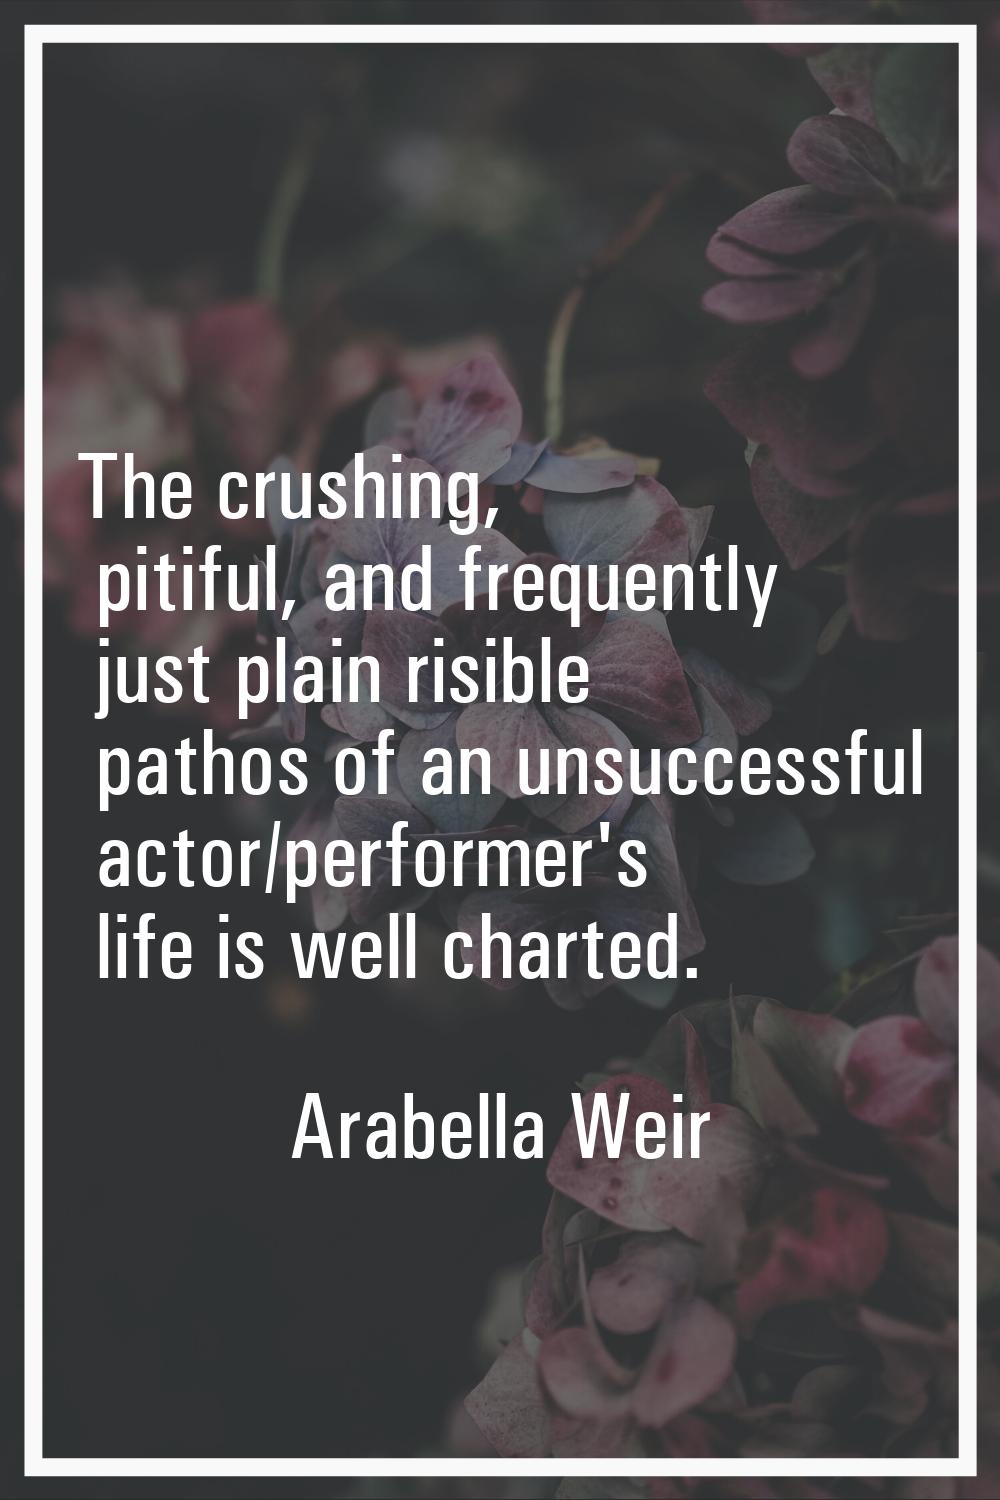 The crushing, pitiful, and frequently just plain risible pathos of an unsuccessful actor/performer'